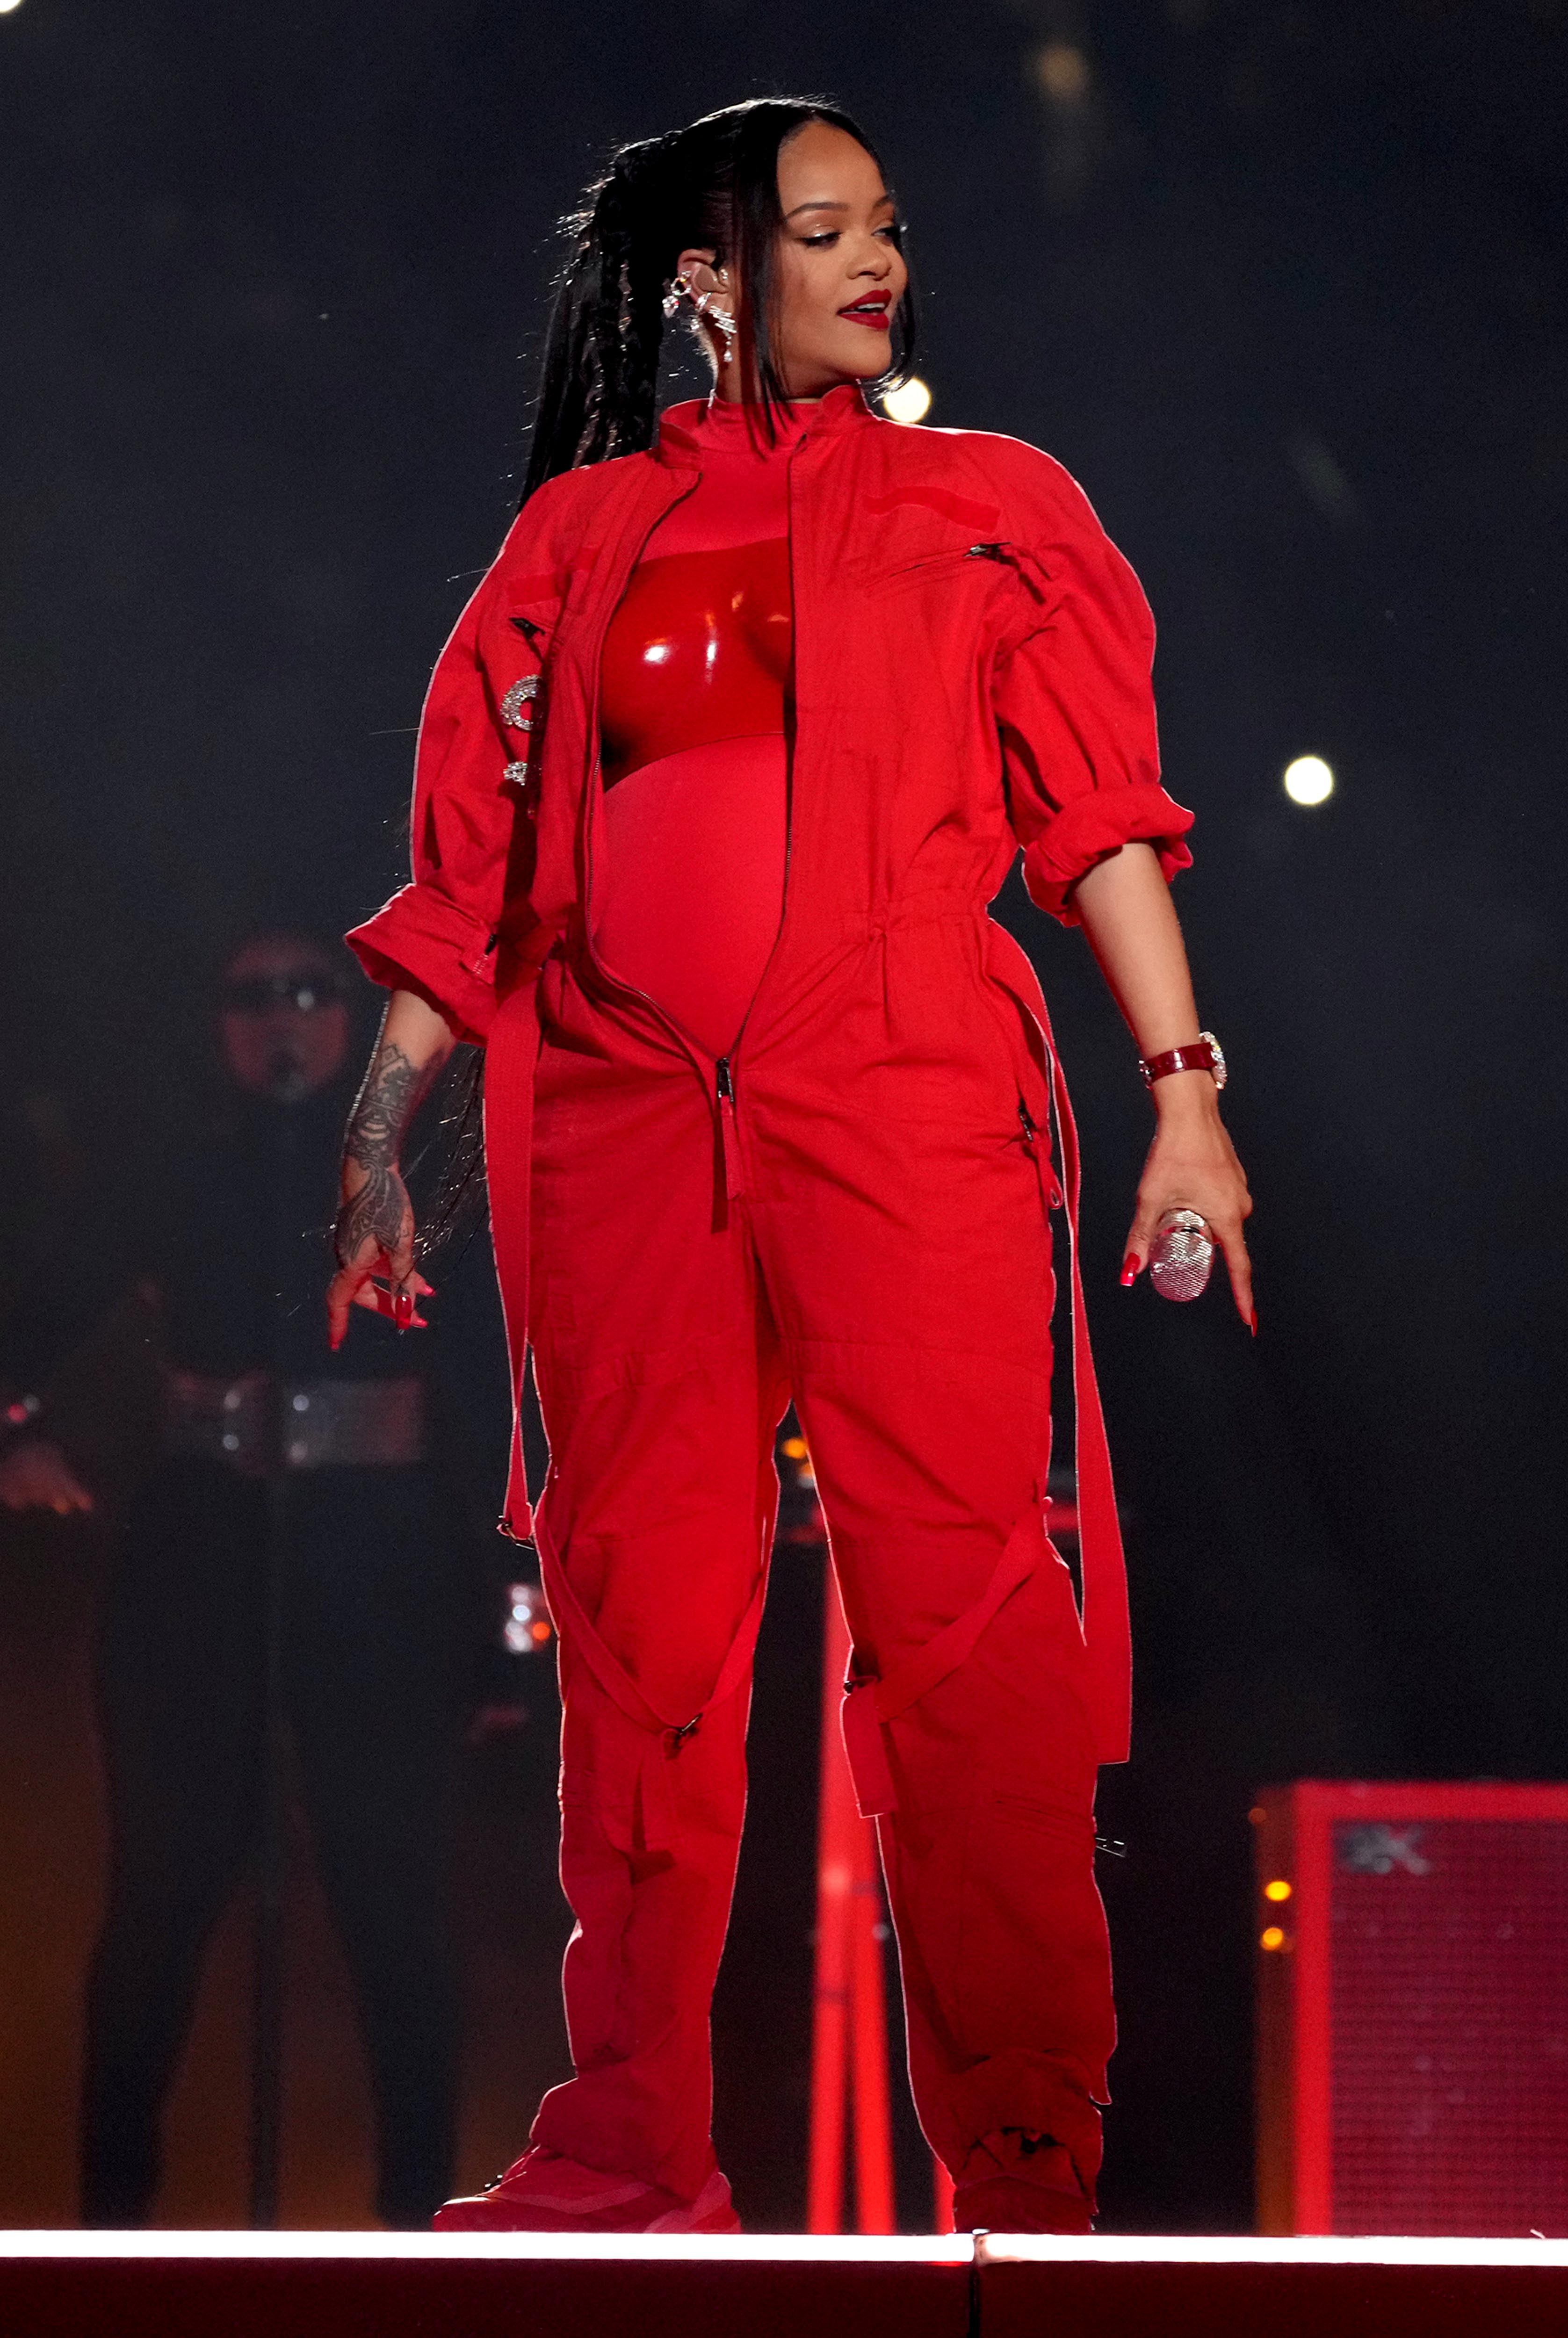 Look: The Designer Pieces Worn By Rihanna For The 2023 Super Bowl